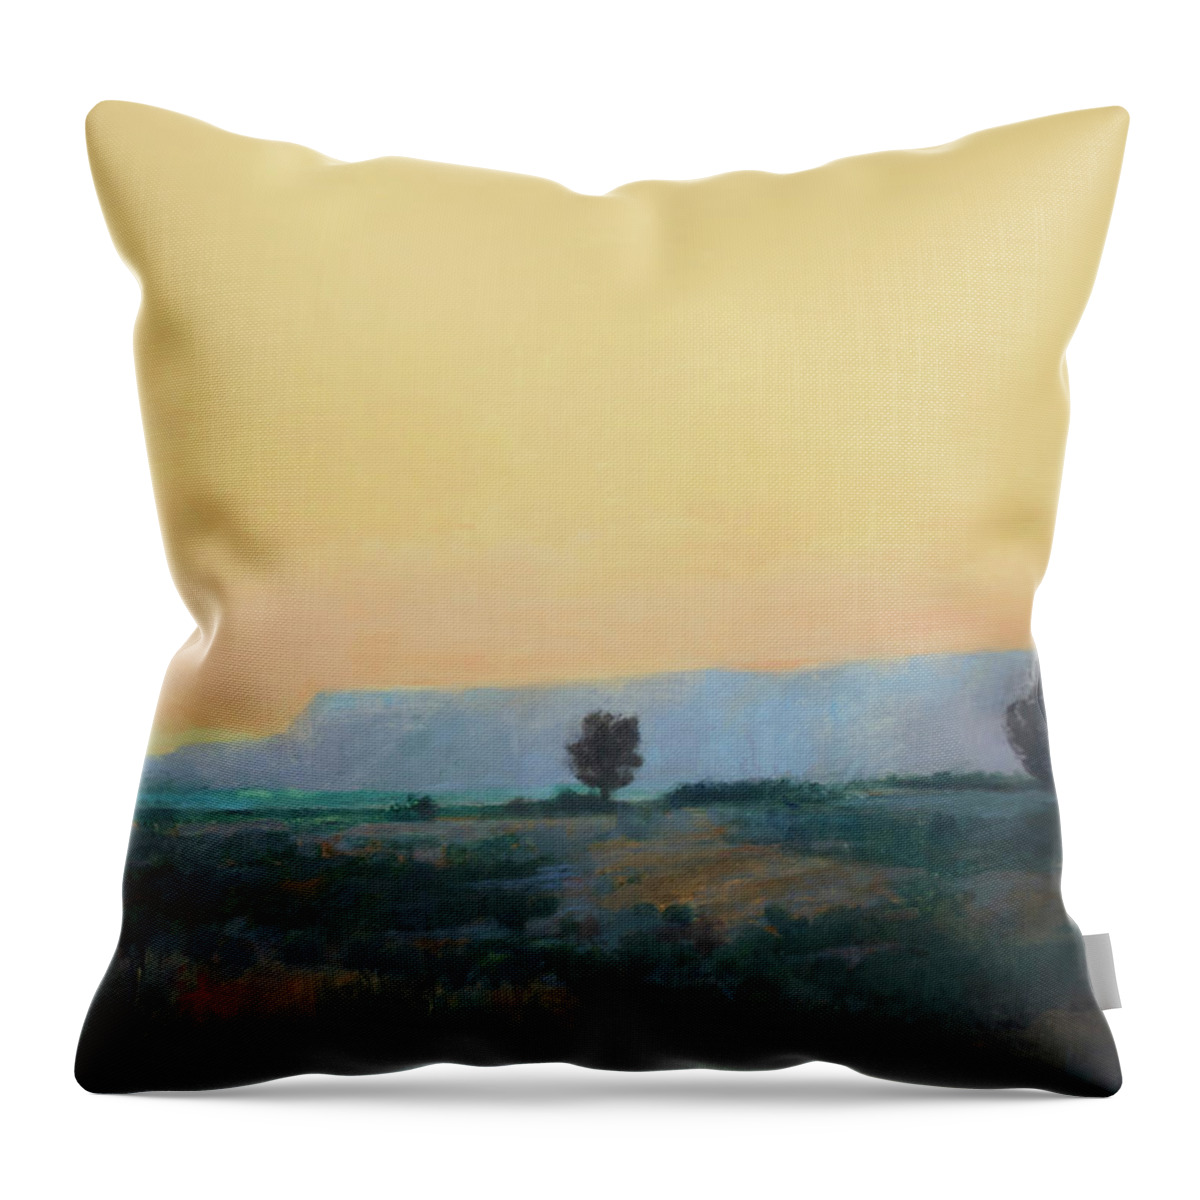 Desert Throw Pillow featuring the painting On to California by Cap Pannell